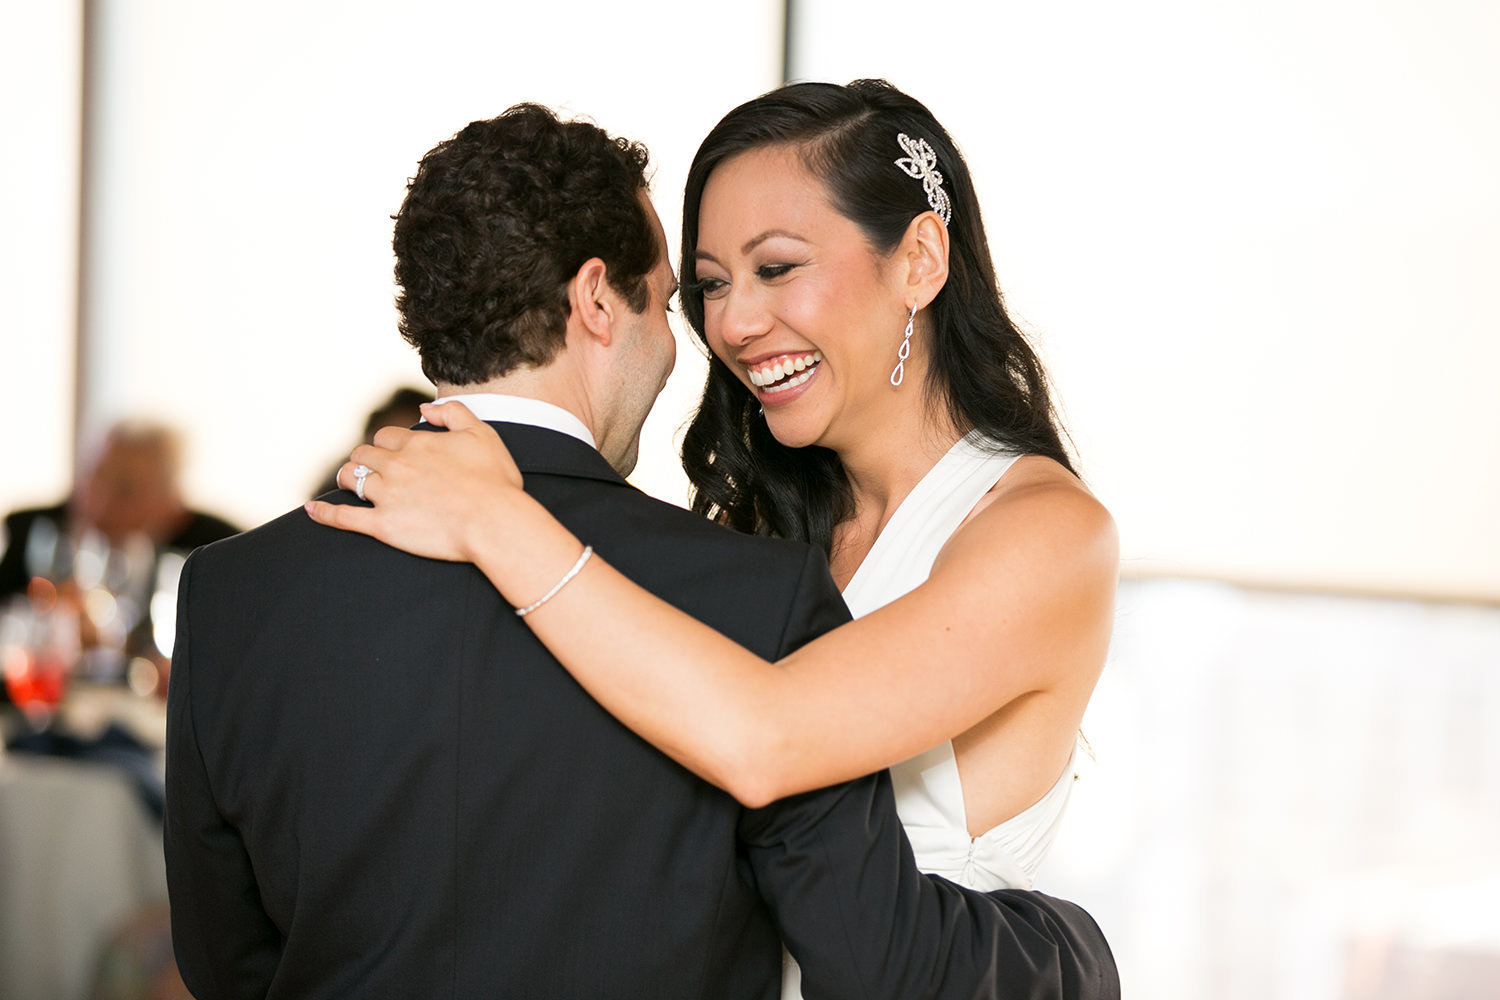 Sweet moment during the first dance at the University Club